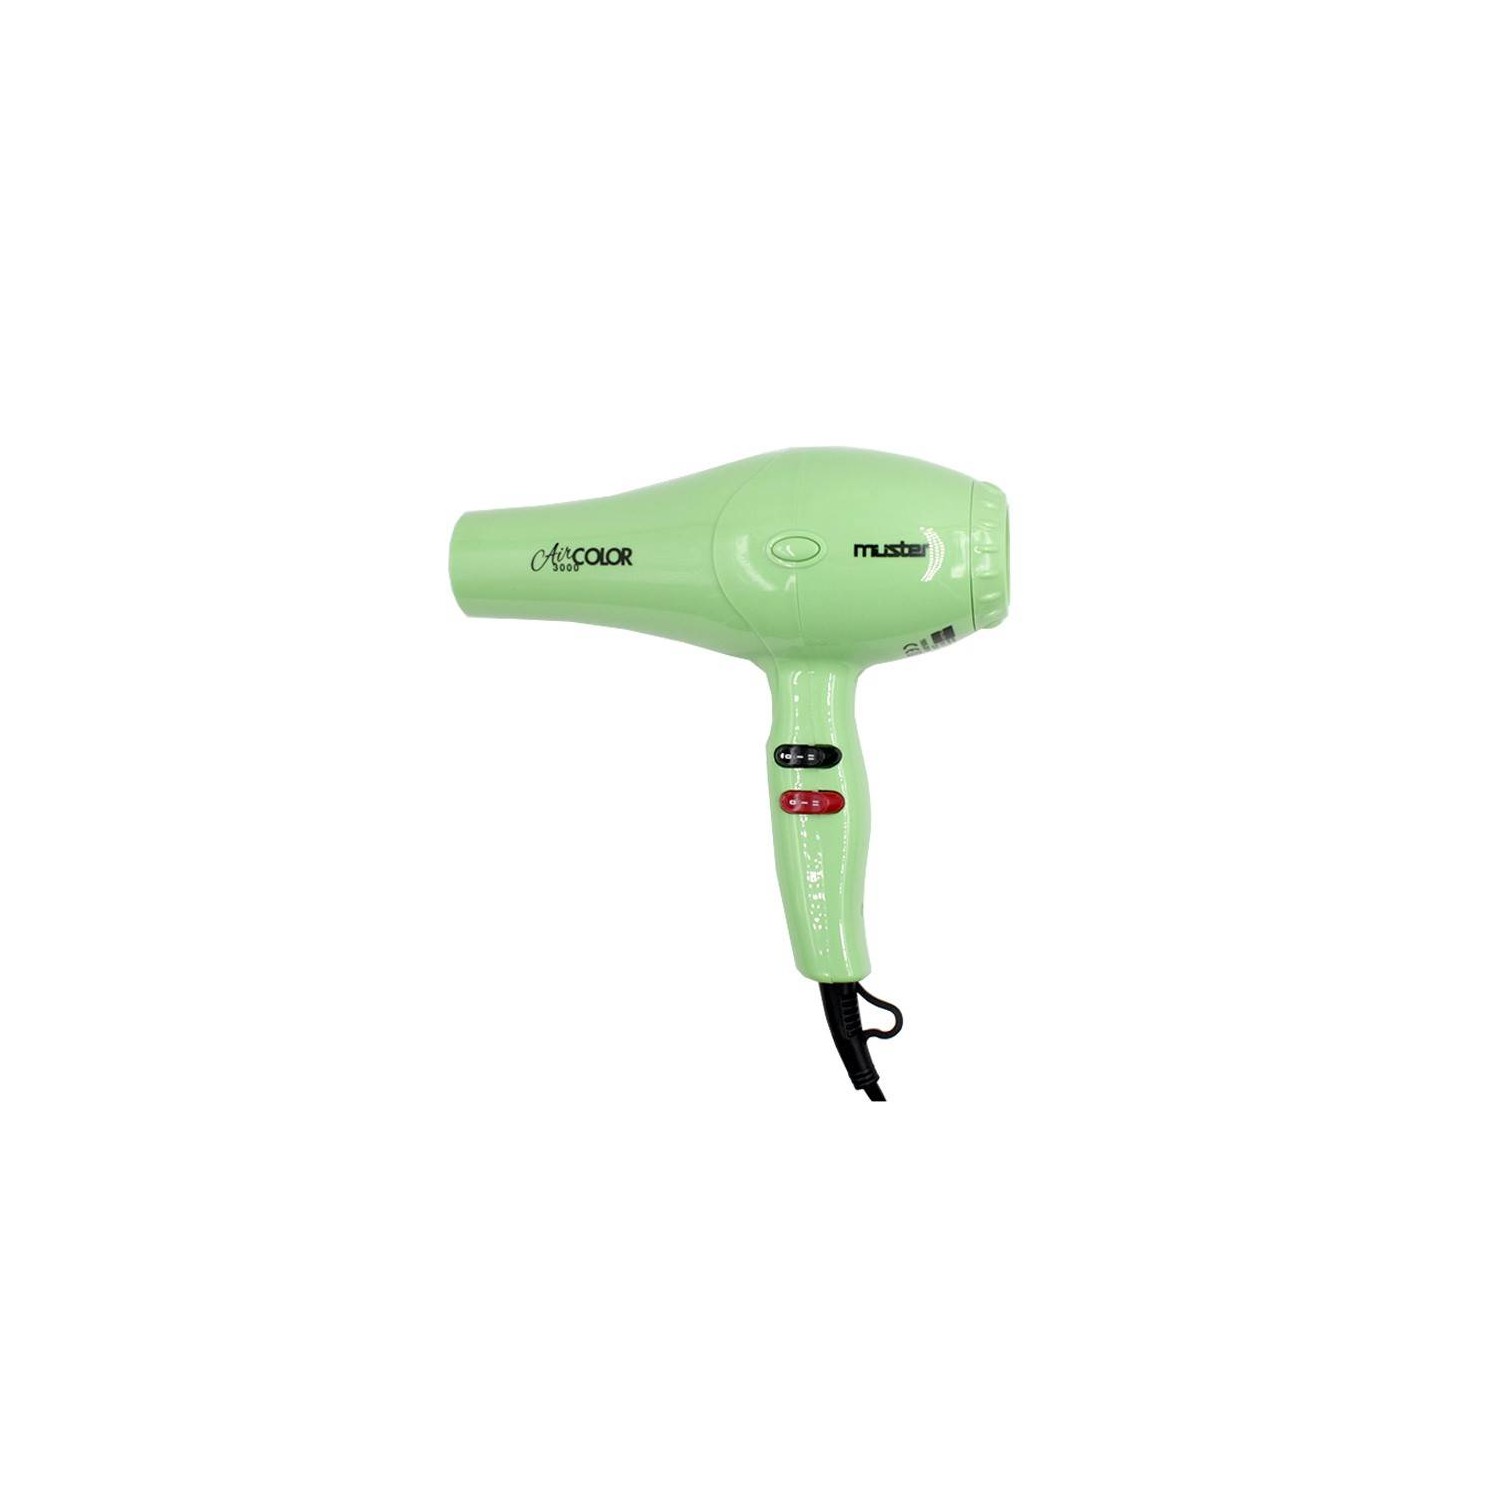 Muster Hair Dryer Air Color 3000 (green)